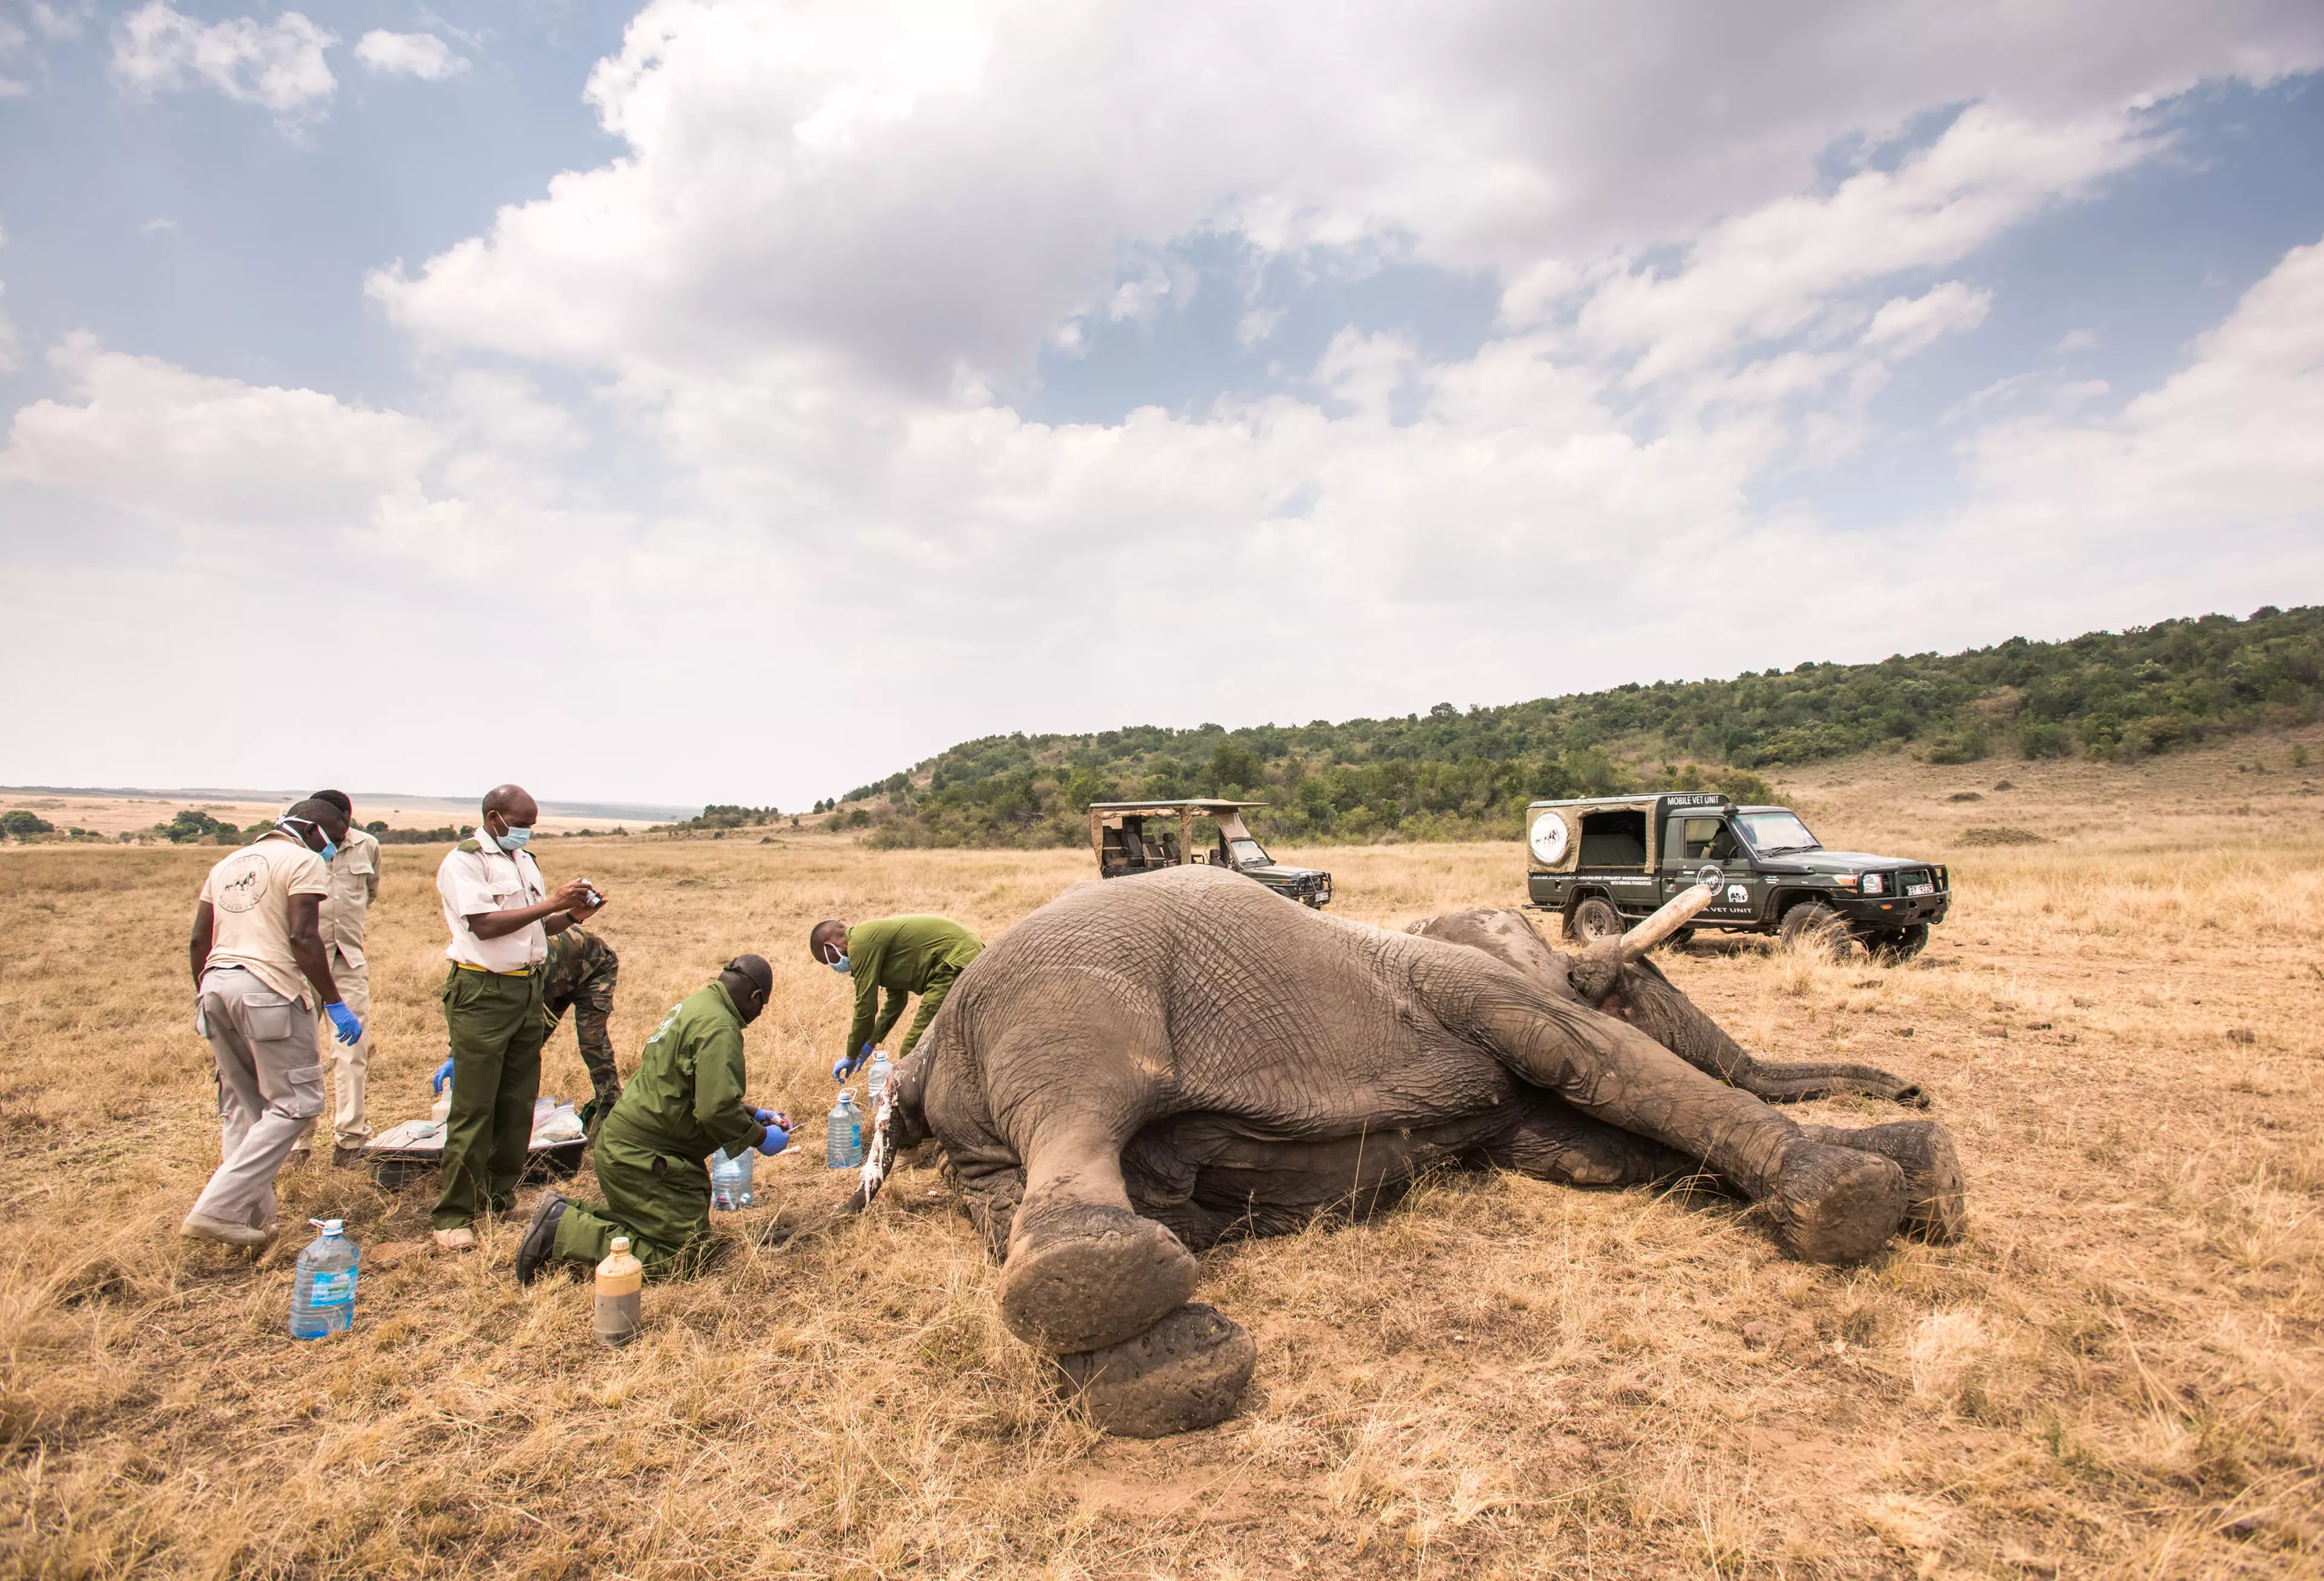 The poor elephant was spotted by conservationists (